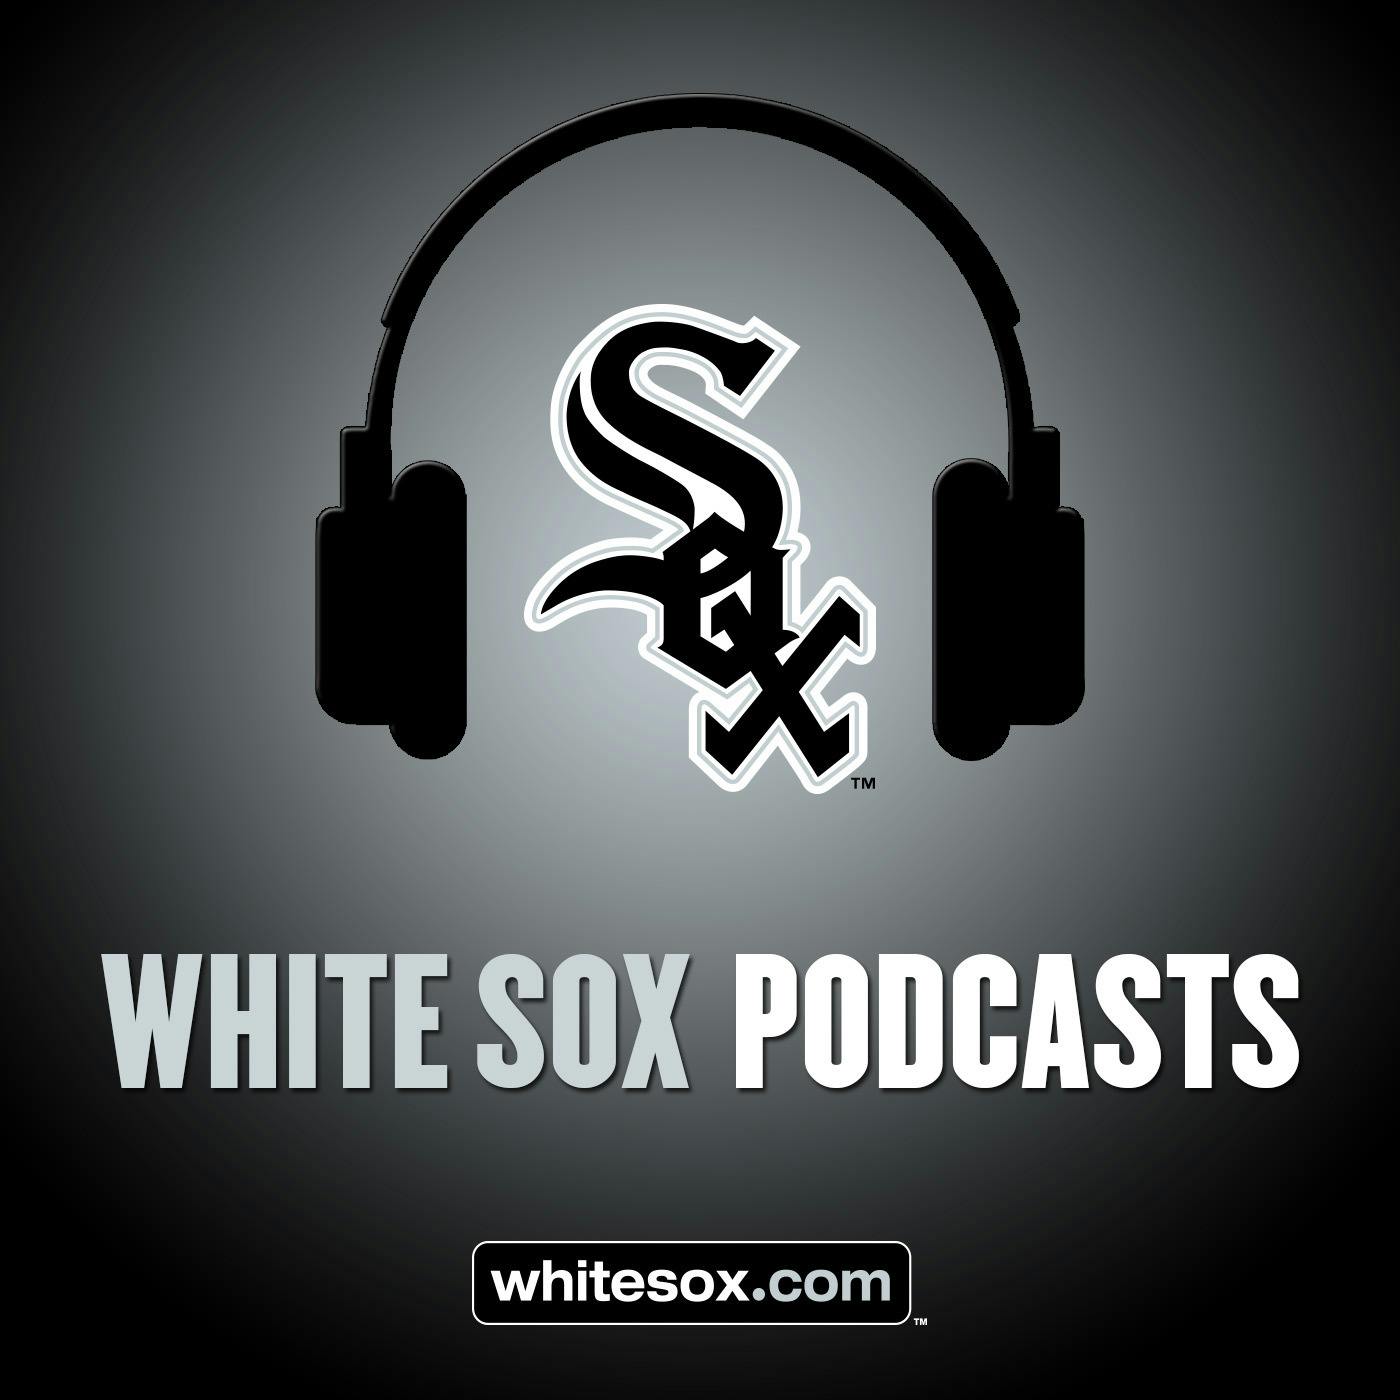 3/17/18: White Sox Weekly